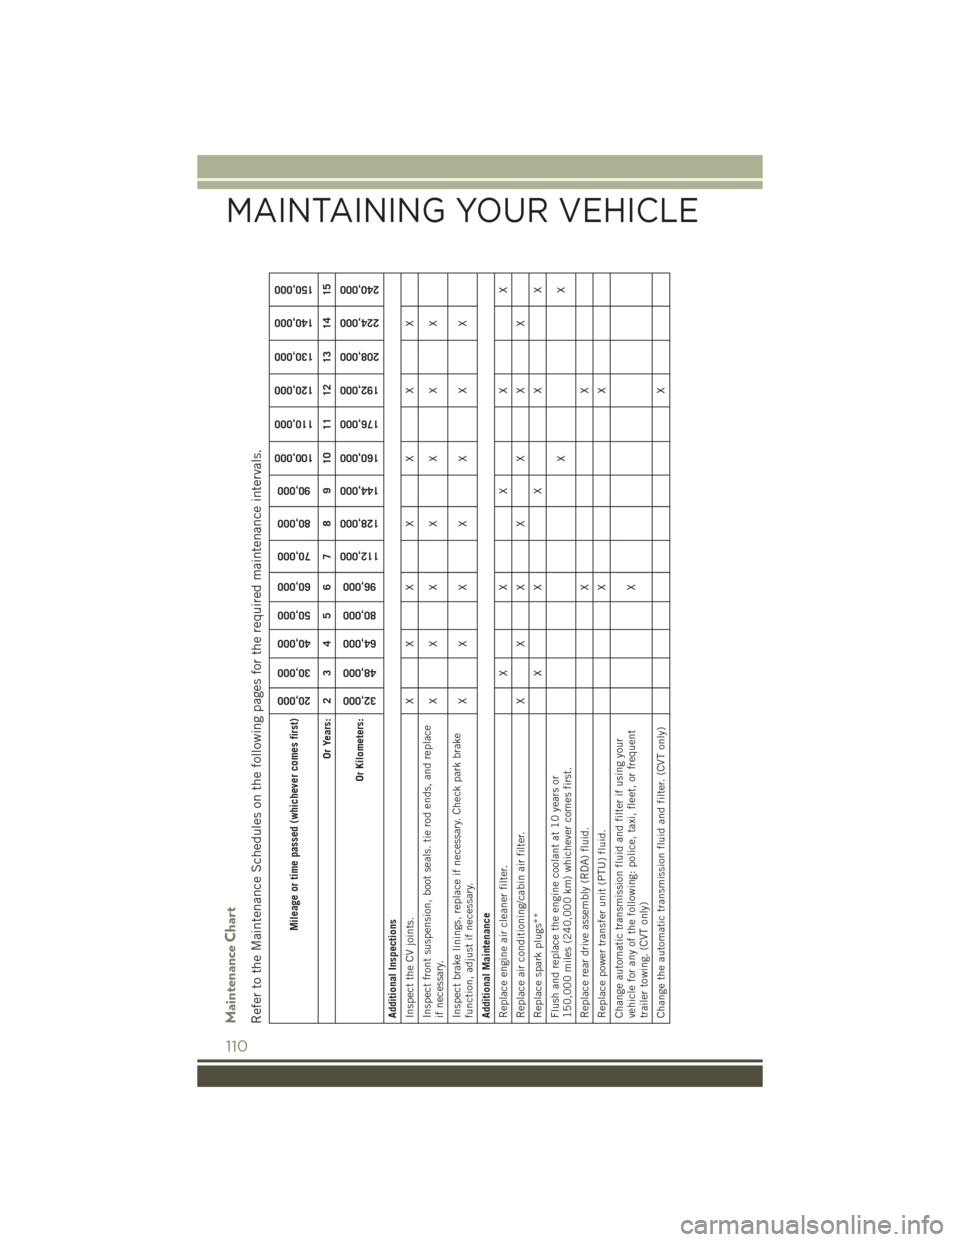 JEEP PATRIOT 2015 1.G User Guide Maintenance ChartRefer to the Maintenance Schedules on the following pages for the required maintenance intervals.
Mileage or time passed (whichever comes first)
20,000
30,000
40,000
50,000
60,000
70,